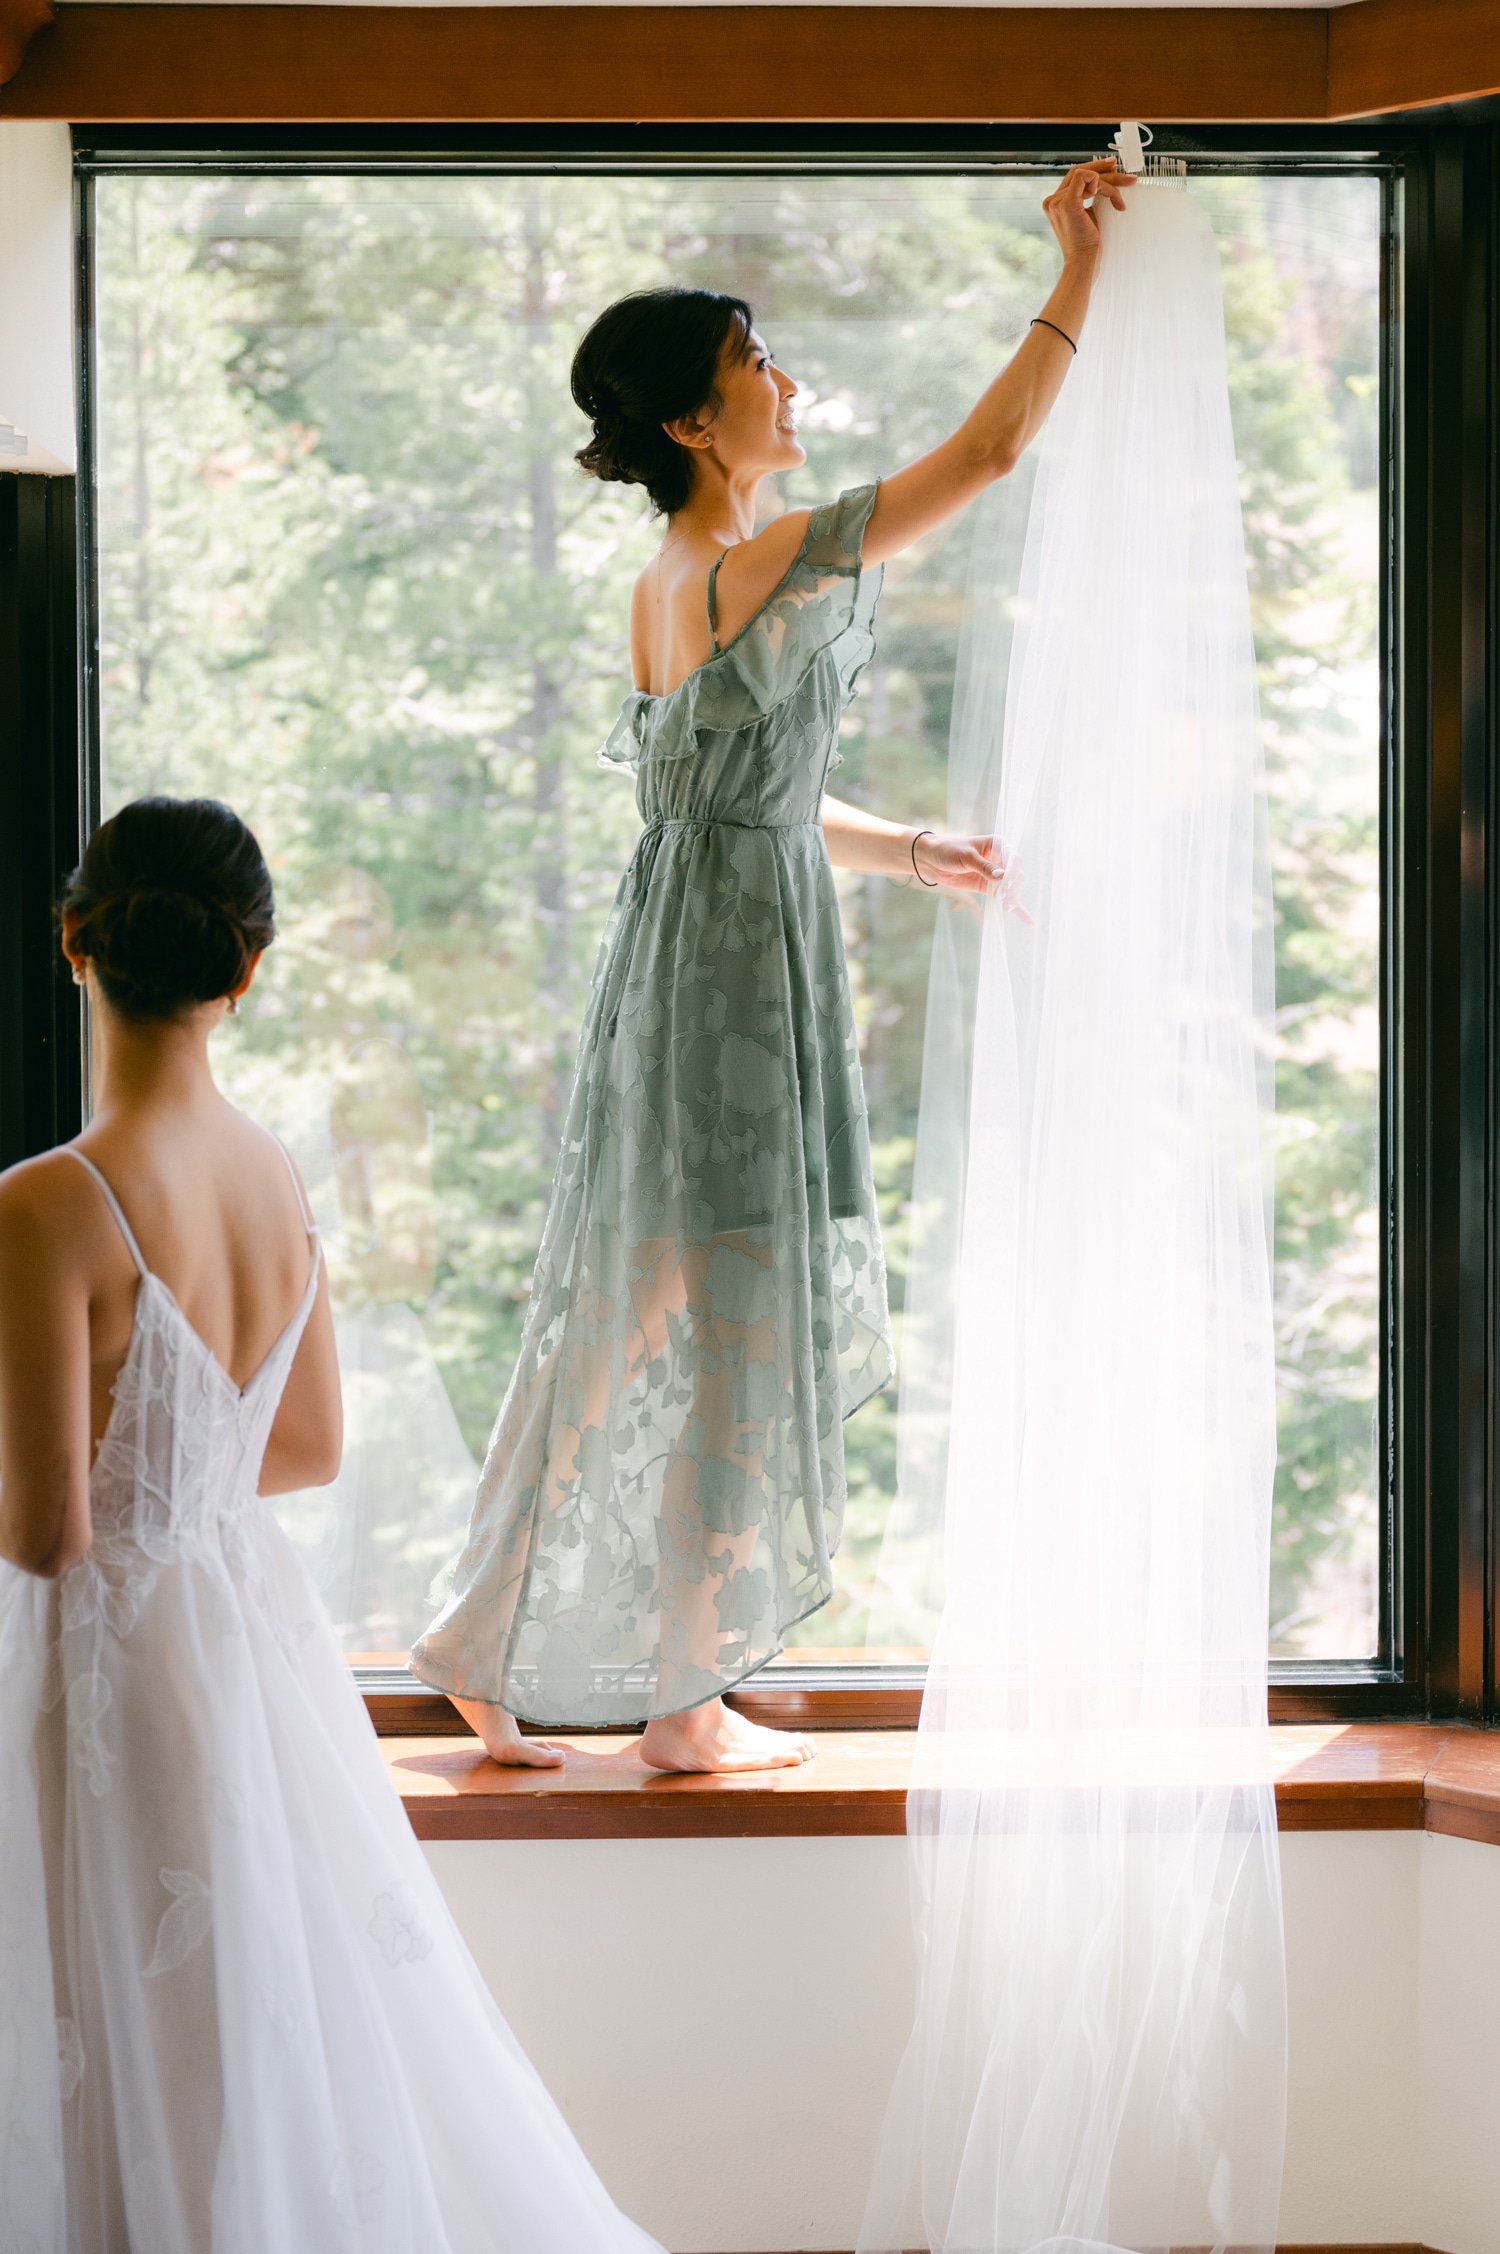 olympic valley stables wedding, photo of the bride and bridesmaid by the window preparing for the wedding